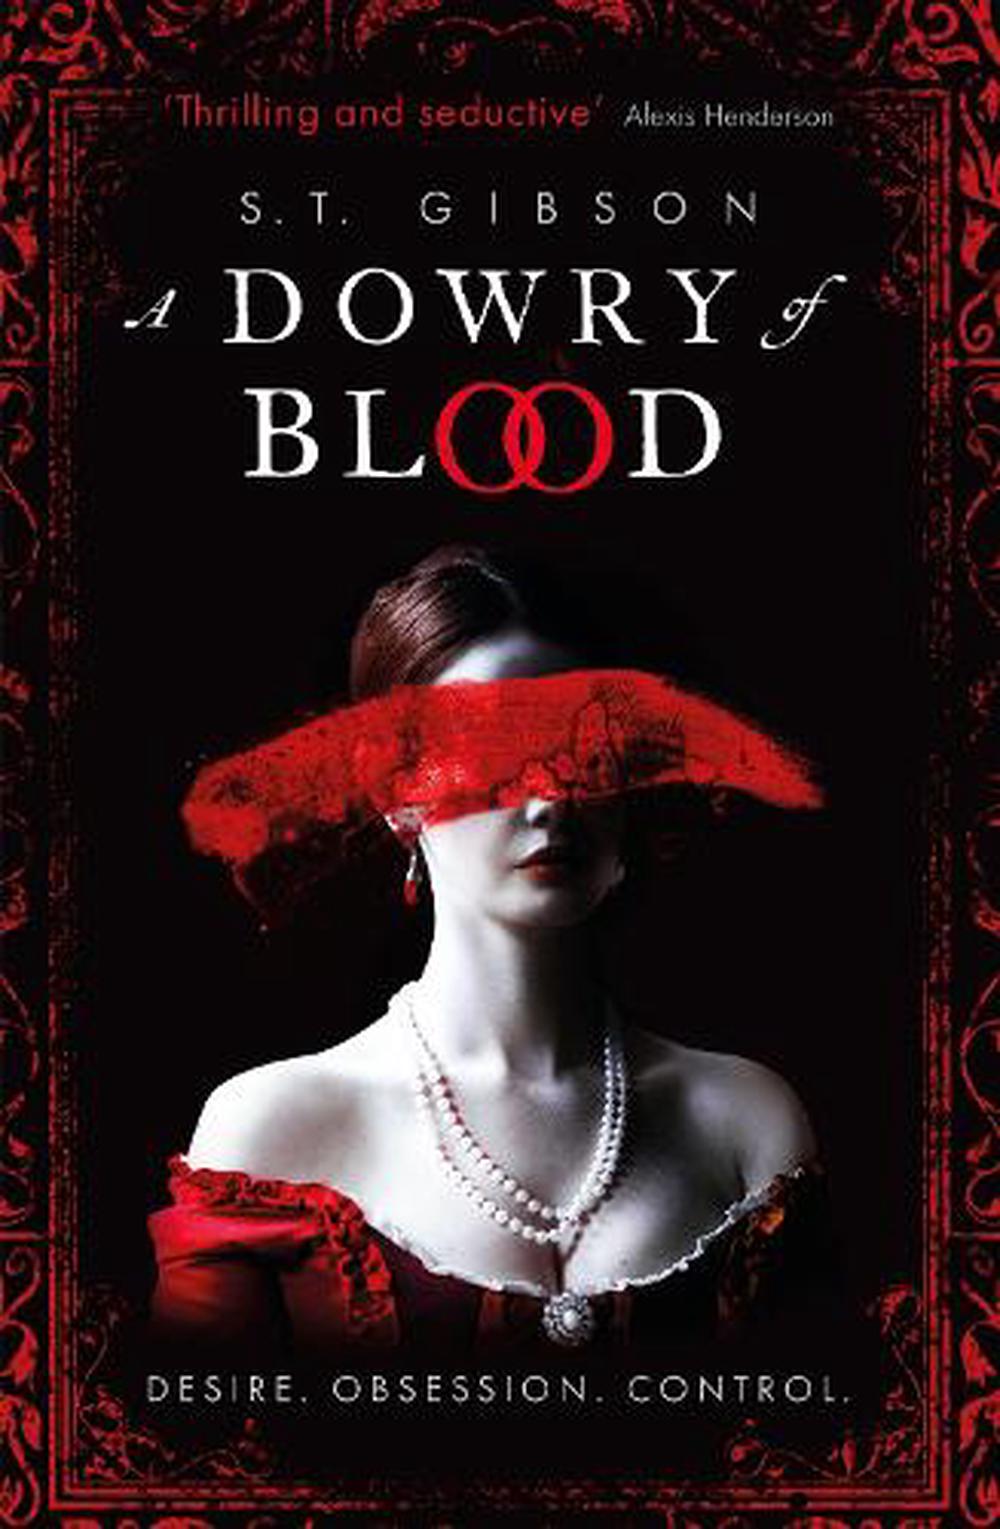 a dowry of blood book buy